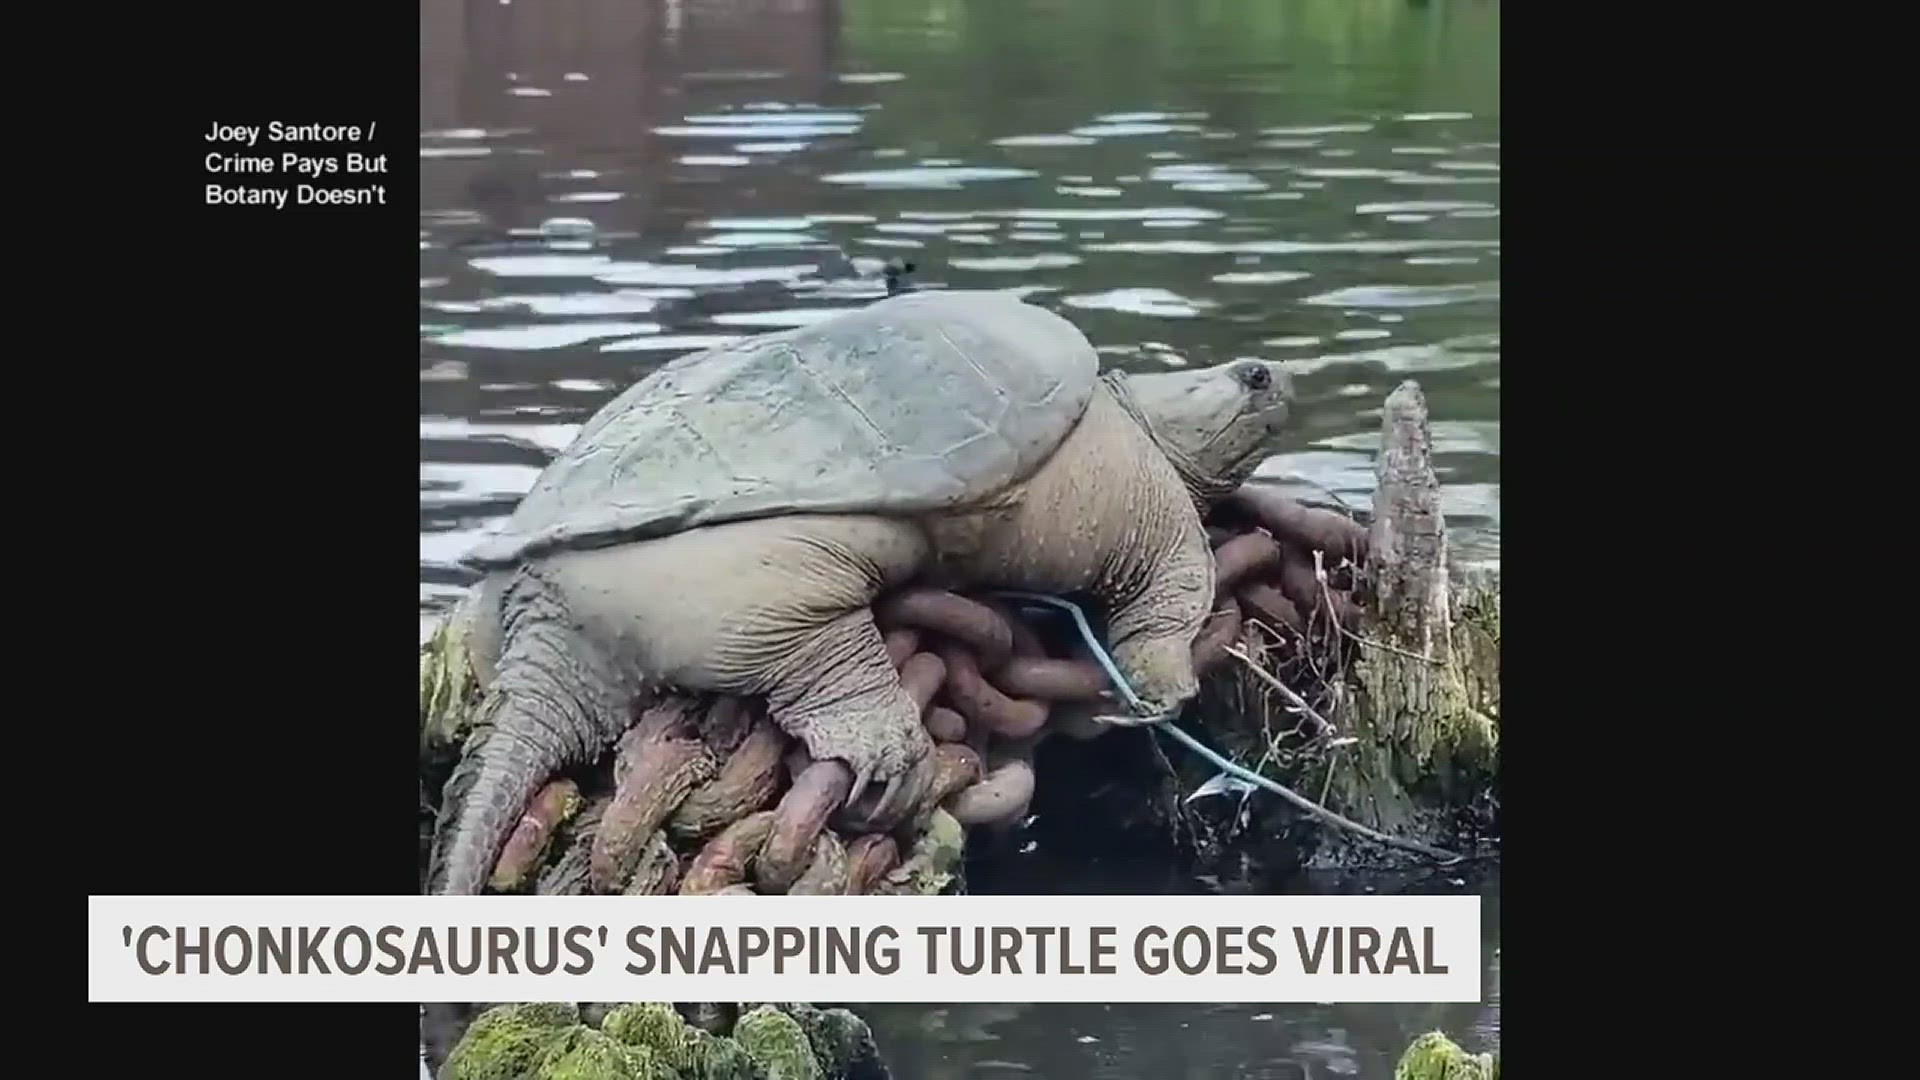 'Chonkosaurus' the snapping turtle was spotted along the Chicago River. It most likely has recently emerged from hibernation.